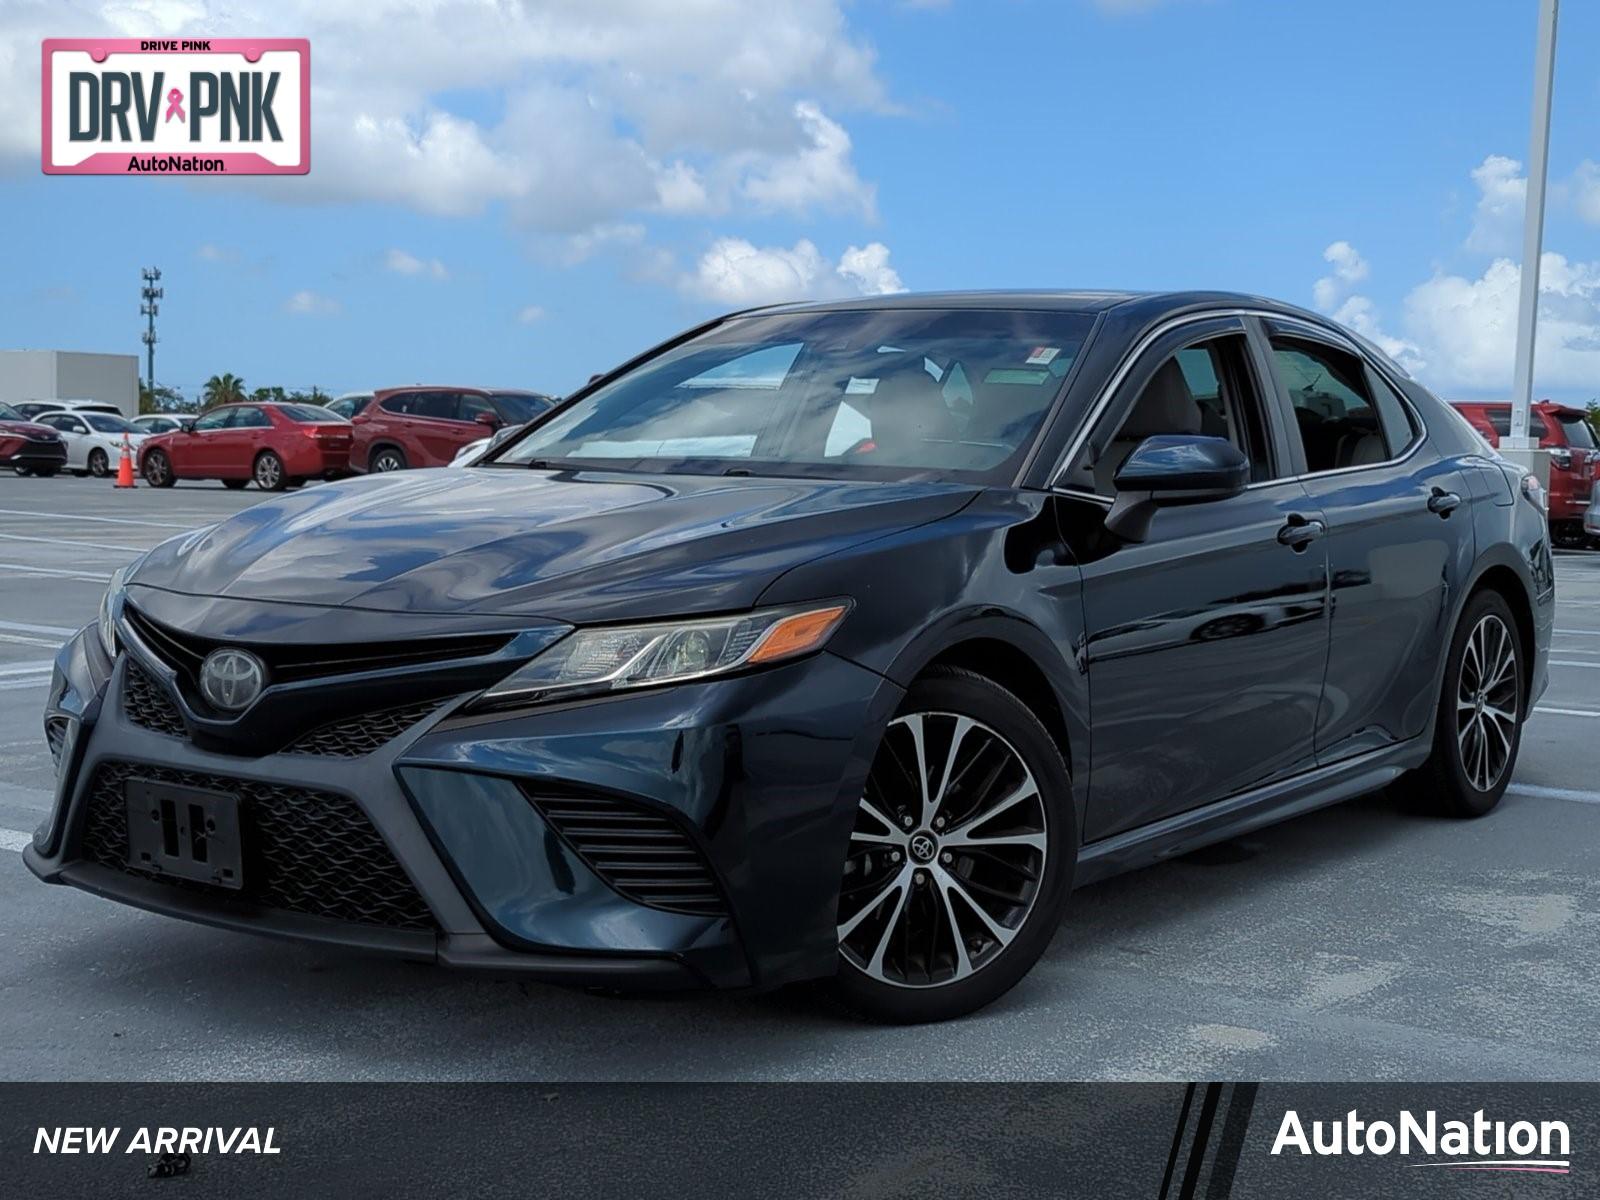 2018 Toyota Camry Vehicle Photo in Ft. Myers, FL 33907